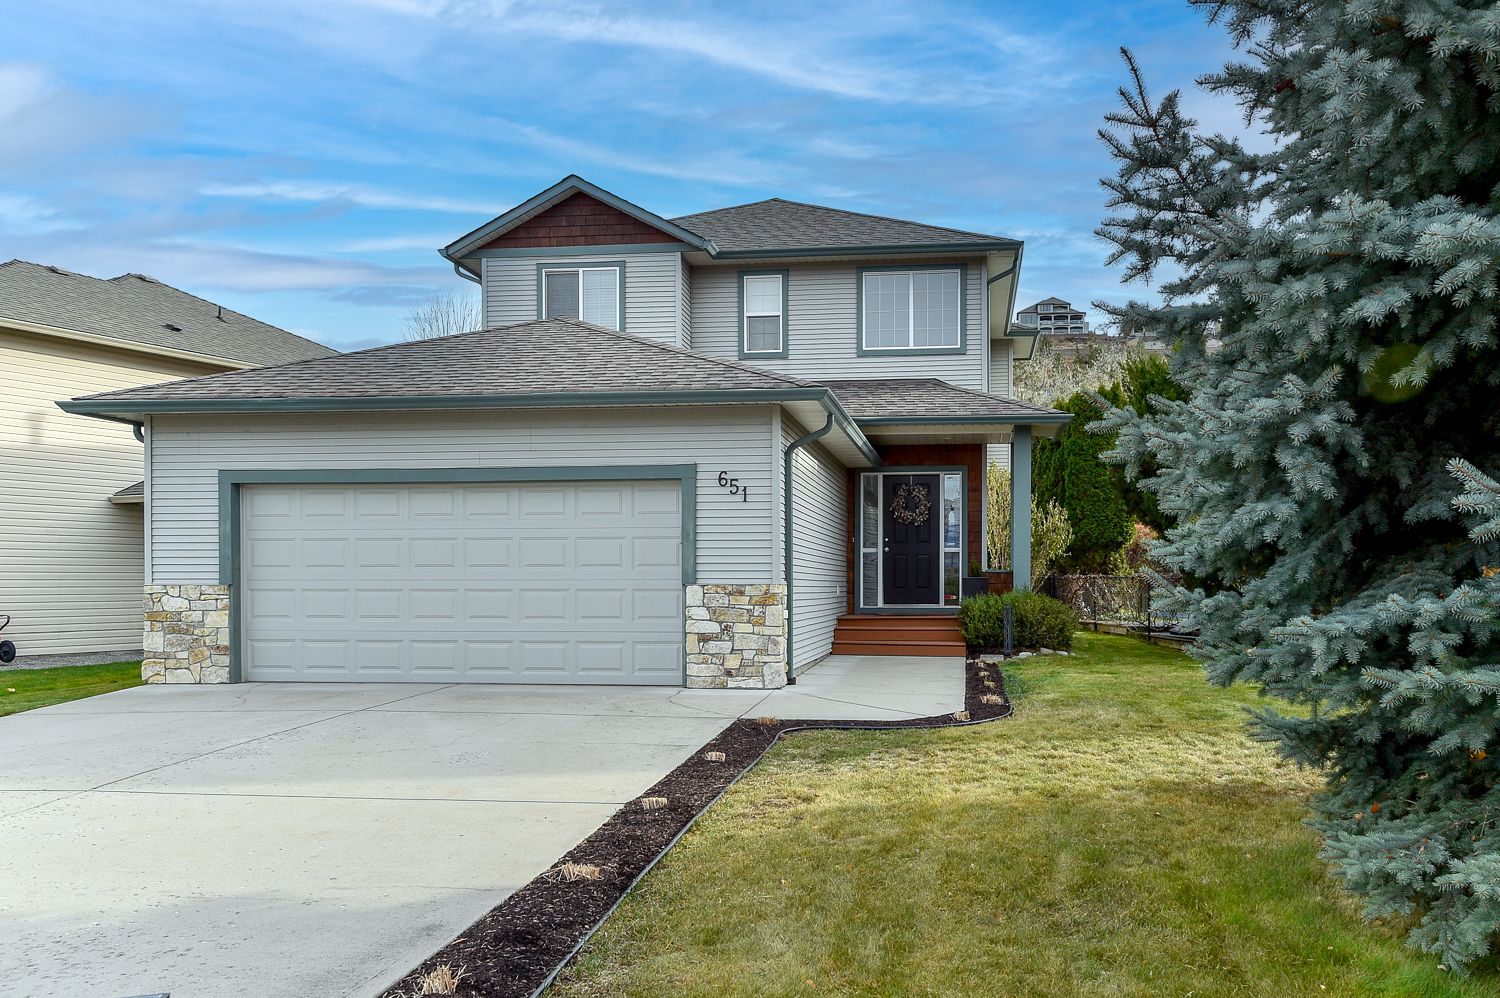 I have sold a property at 651 South Crest Drive in Kelowna
